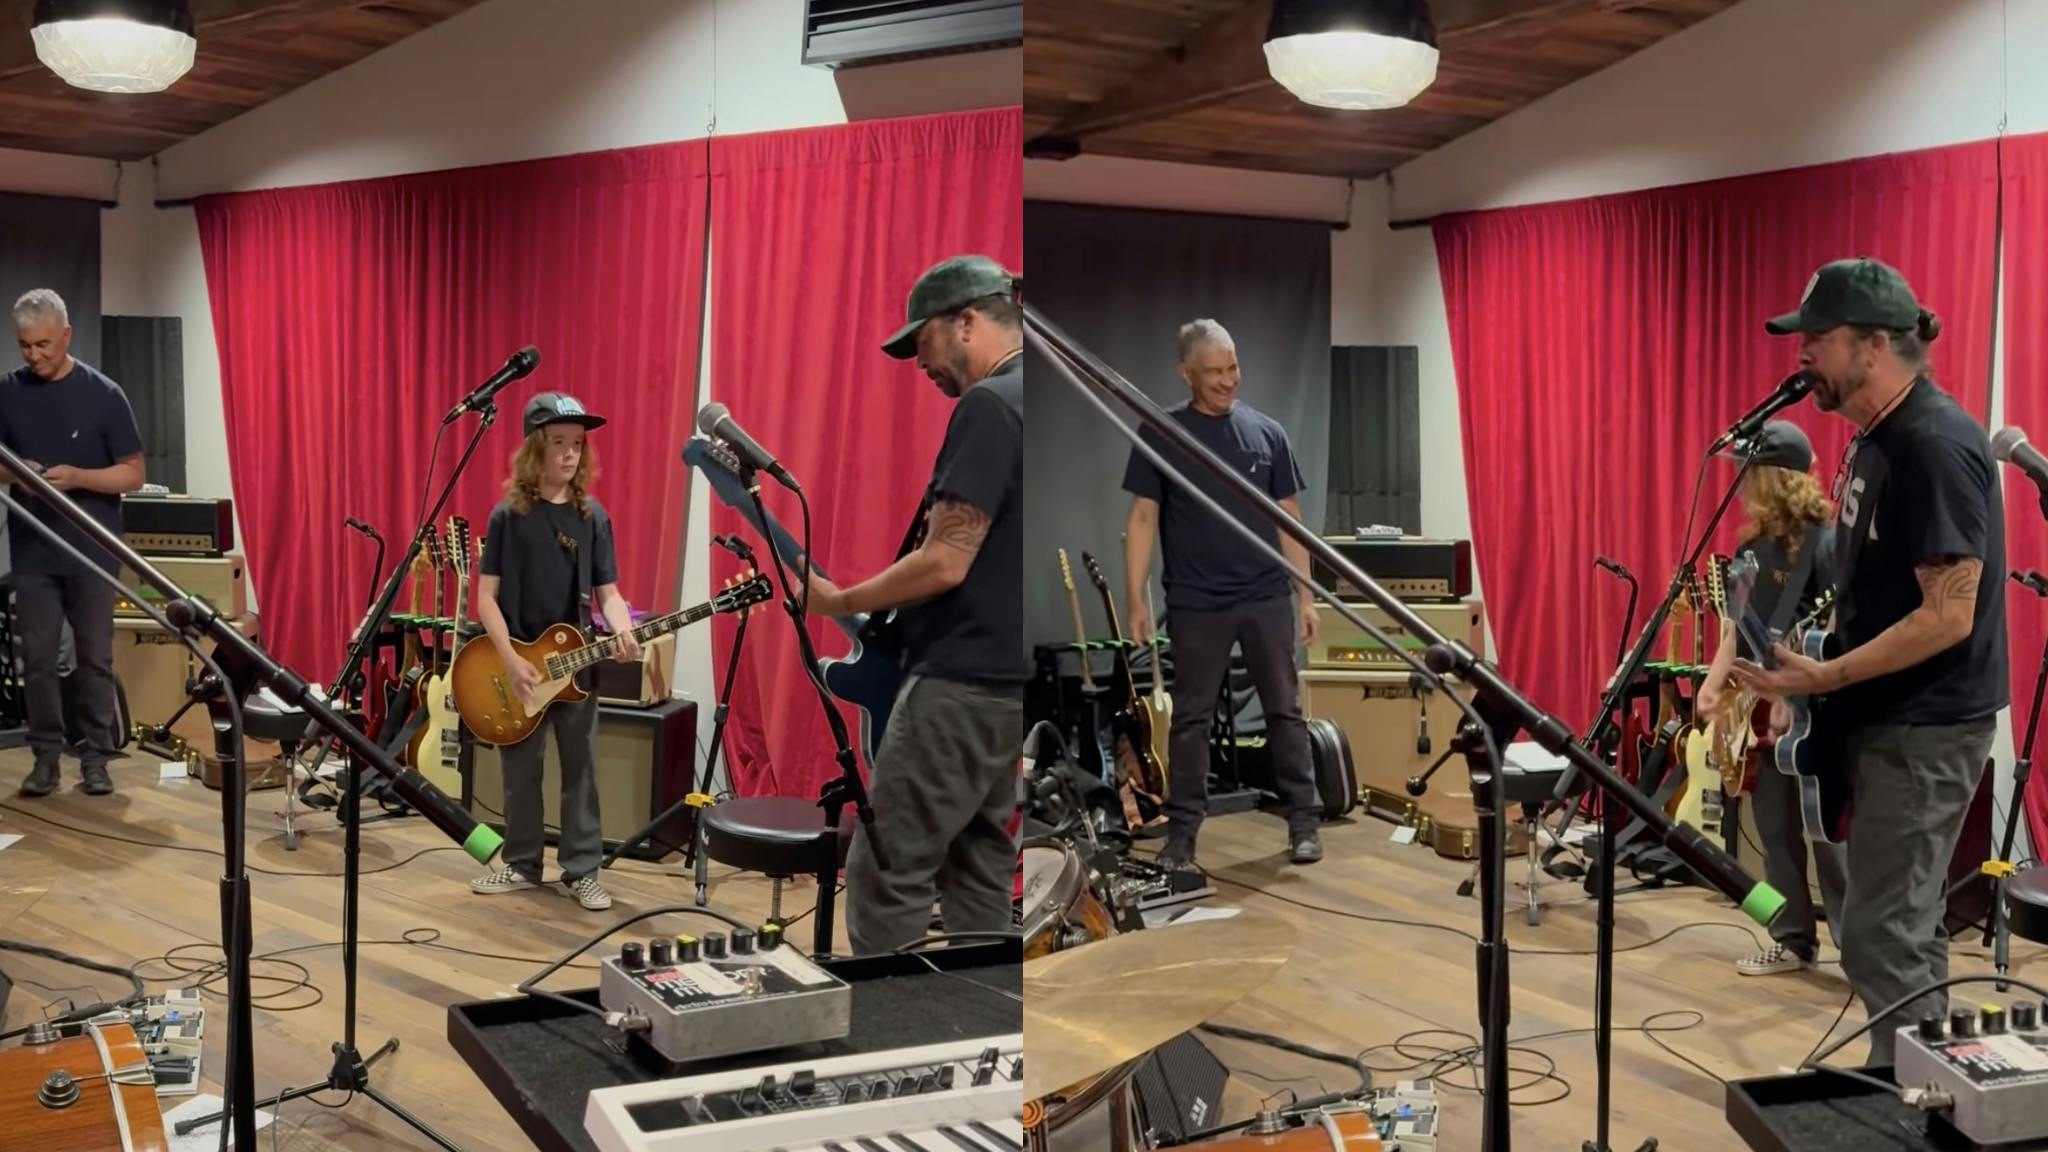 See Foo Fighters play Everlong with Scott Ian’s 12-year-old son on guitar